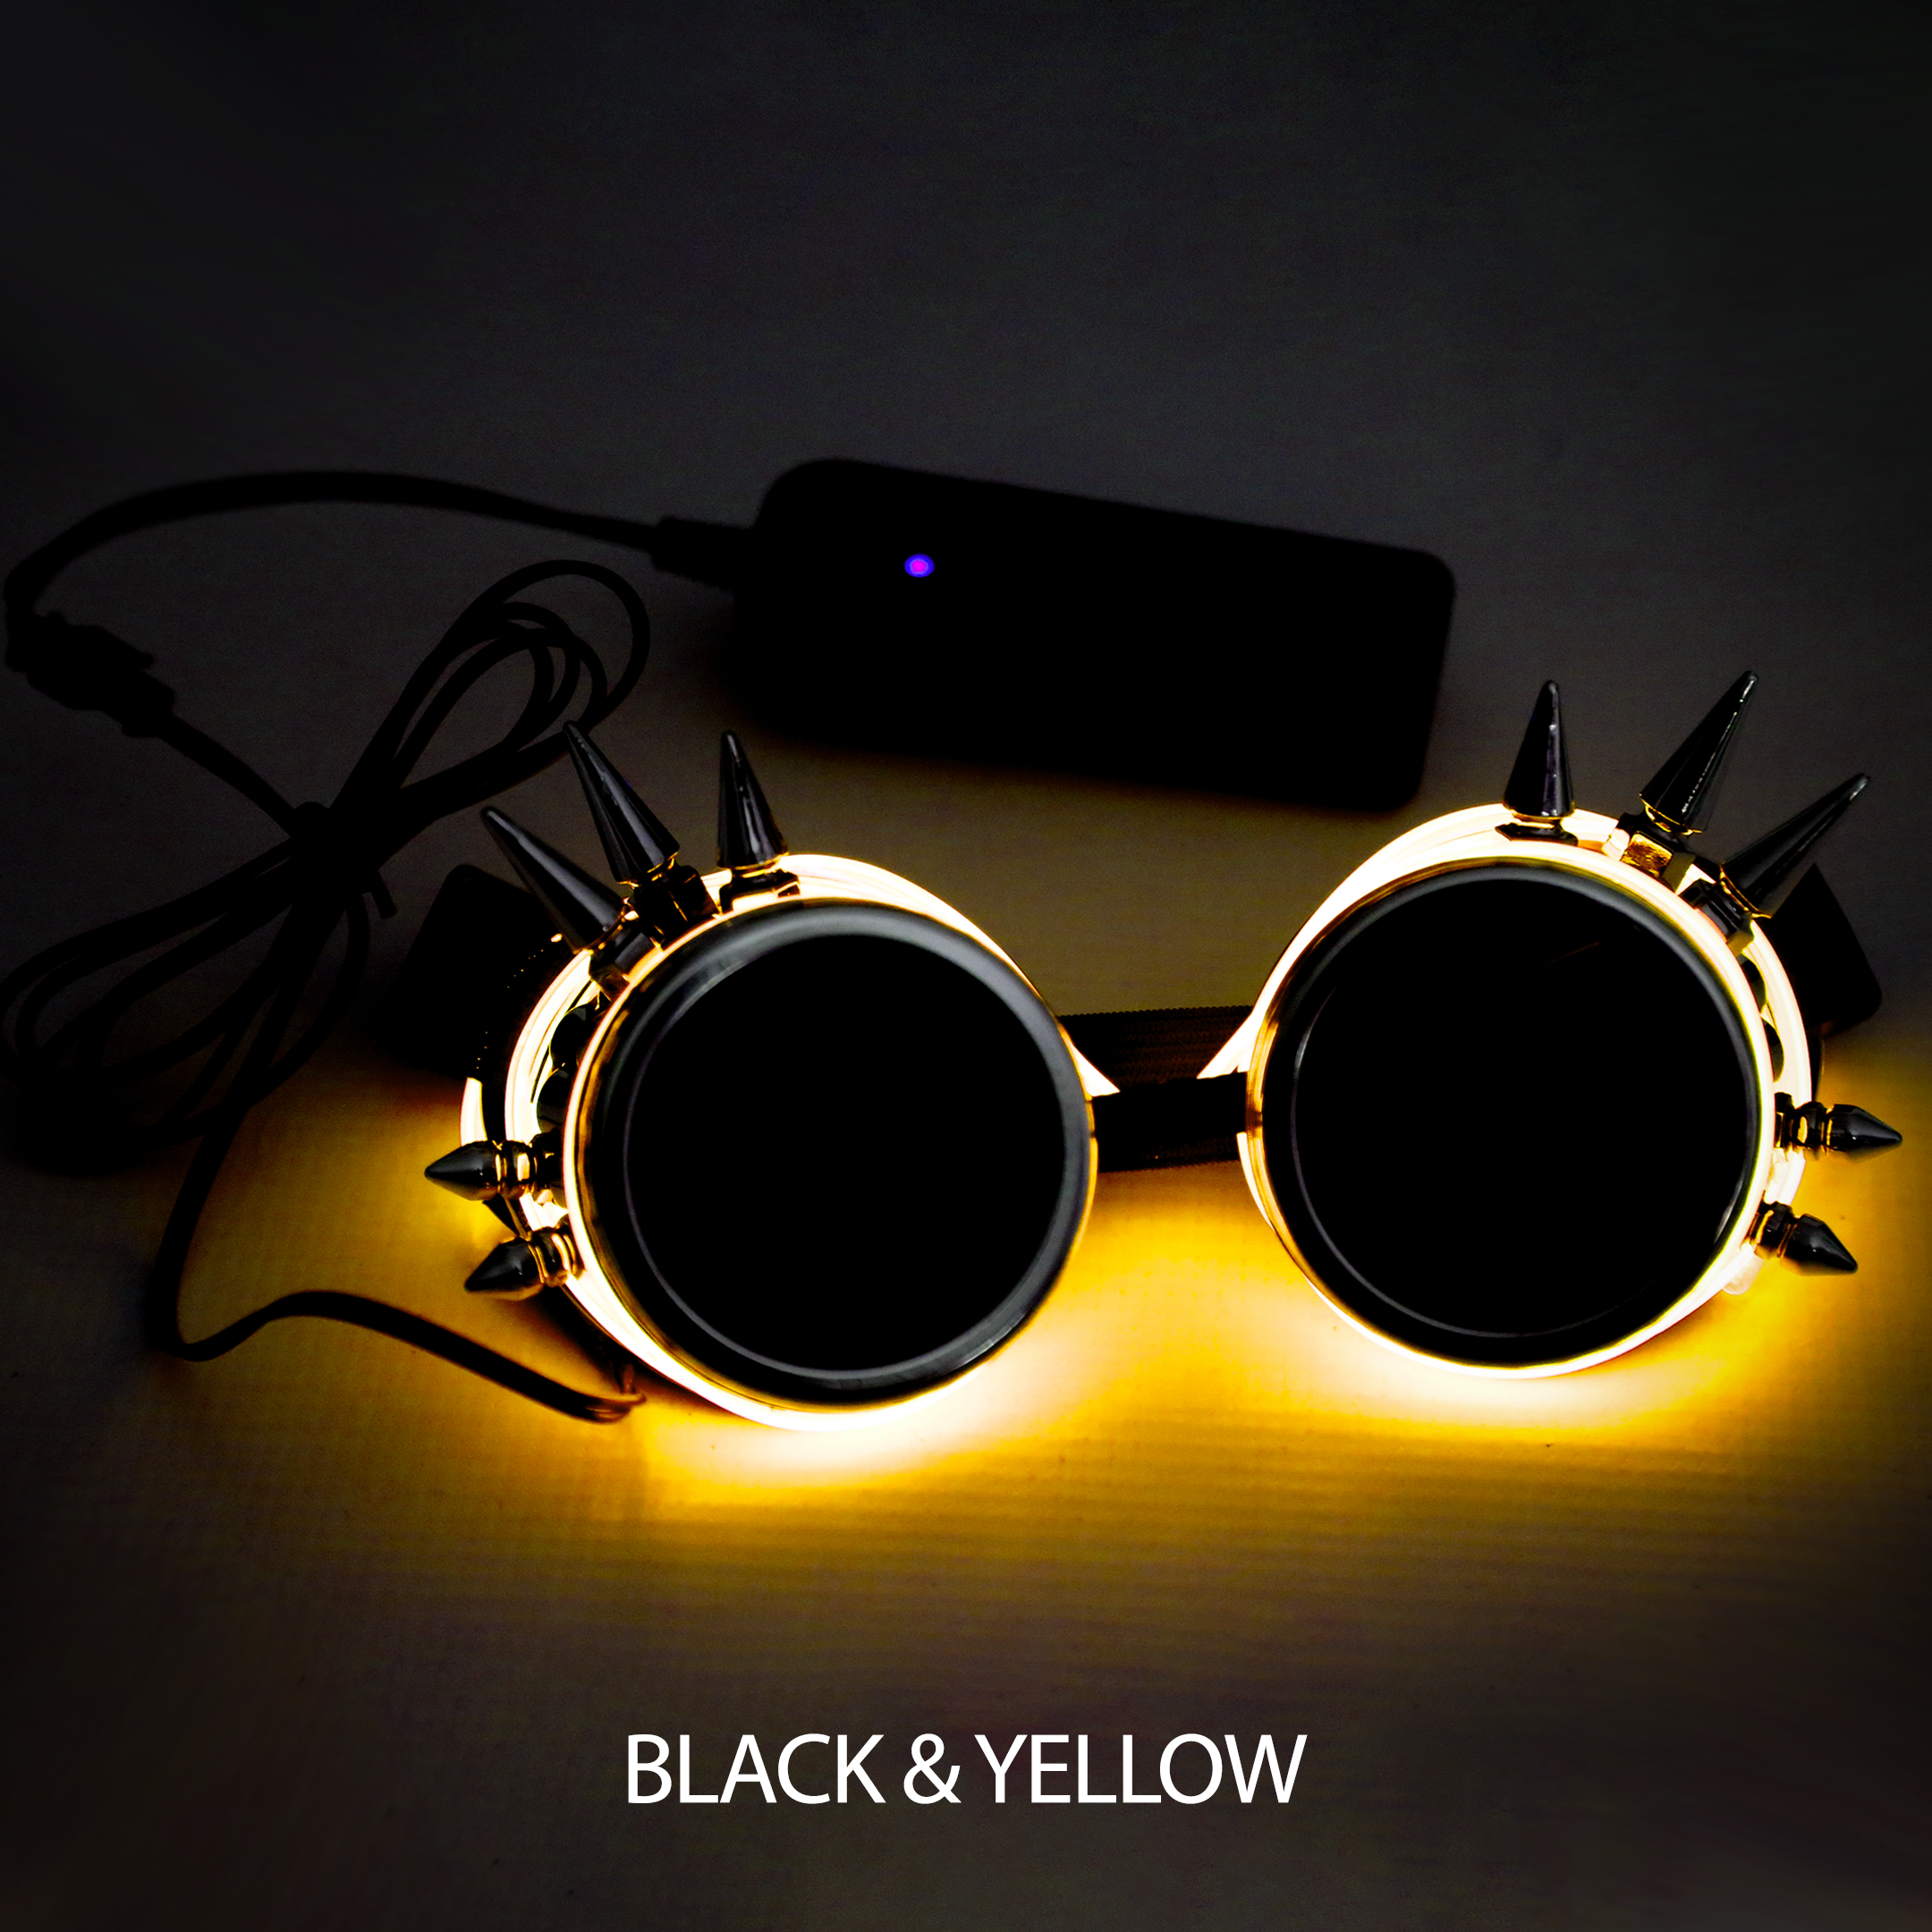 Black & Yellow LED steampunk glasses Electro Glow | South Africa's Best LED Festival Gear & Rave Clothes - festivals outfits, clothes festival, festival clothing south africa, festival ideas outfits, festival outfits rave, festival wear, steam punk goggle, rave glasses, outfit for a rave, kaleidoscope glasses, diffraction glasses, clothes for a rave, rave sunglasses, spectral glasses, rave goggles, clothes for a rave, rave clothing south africa, festival wear south africa, accessories festival